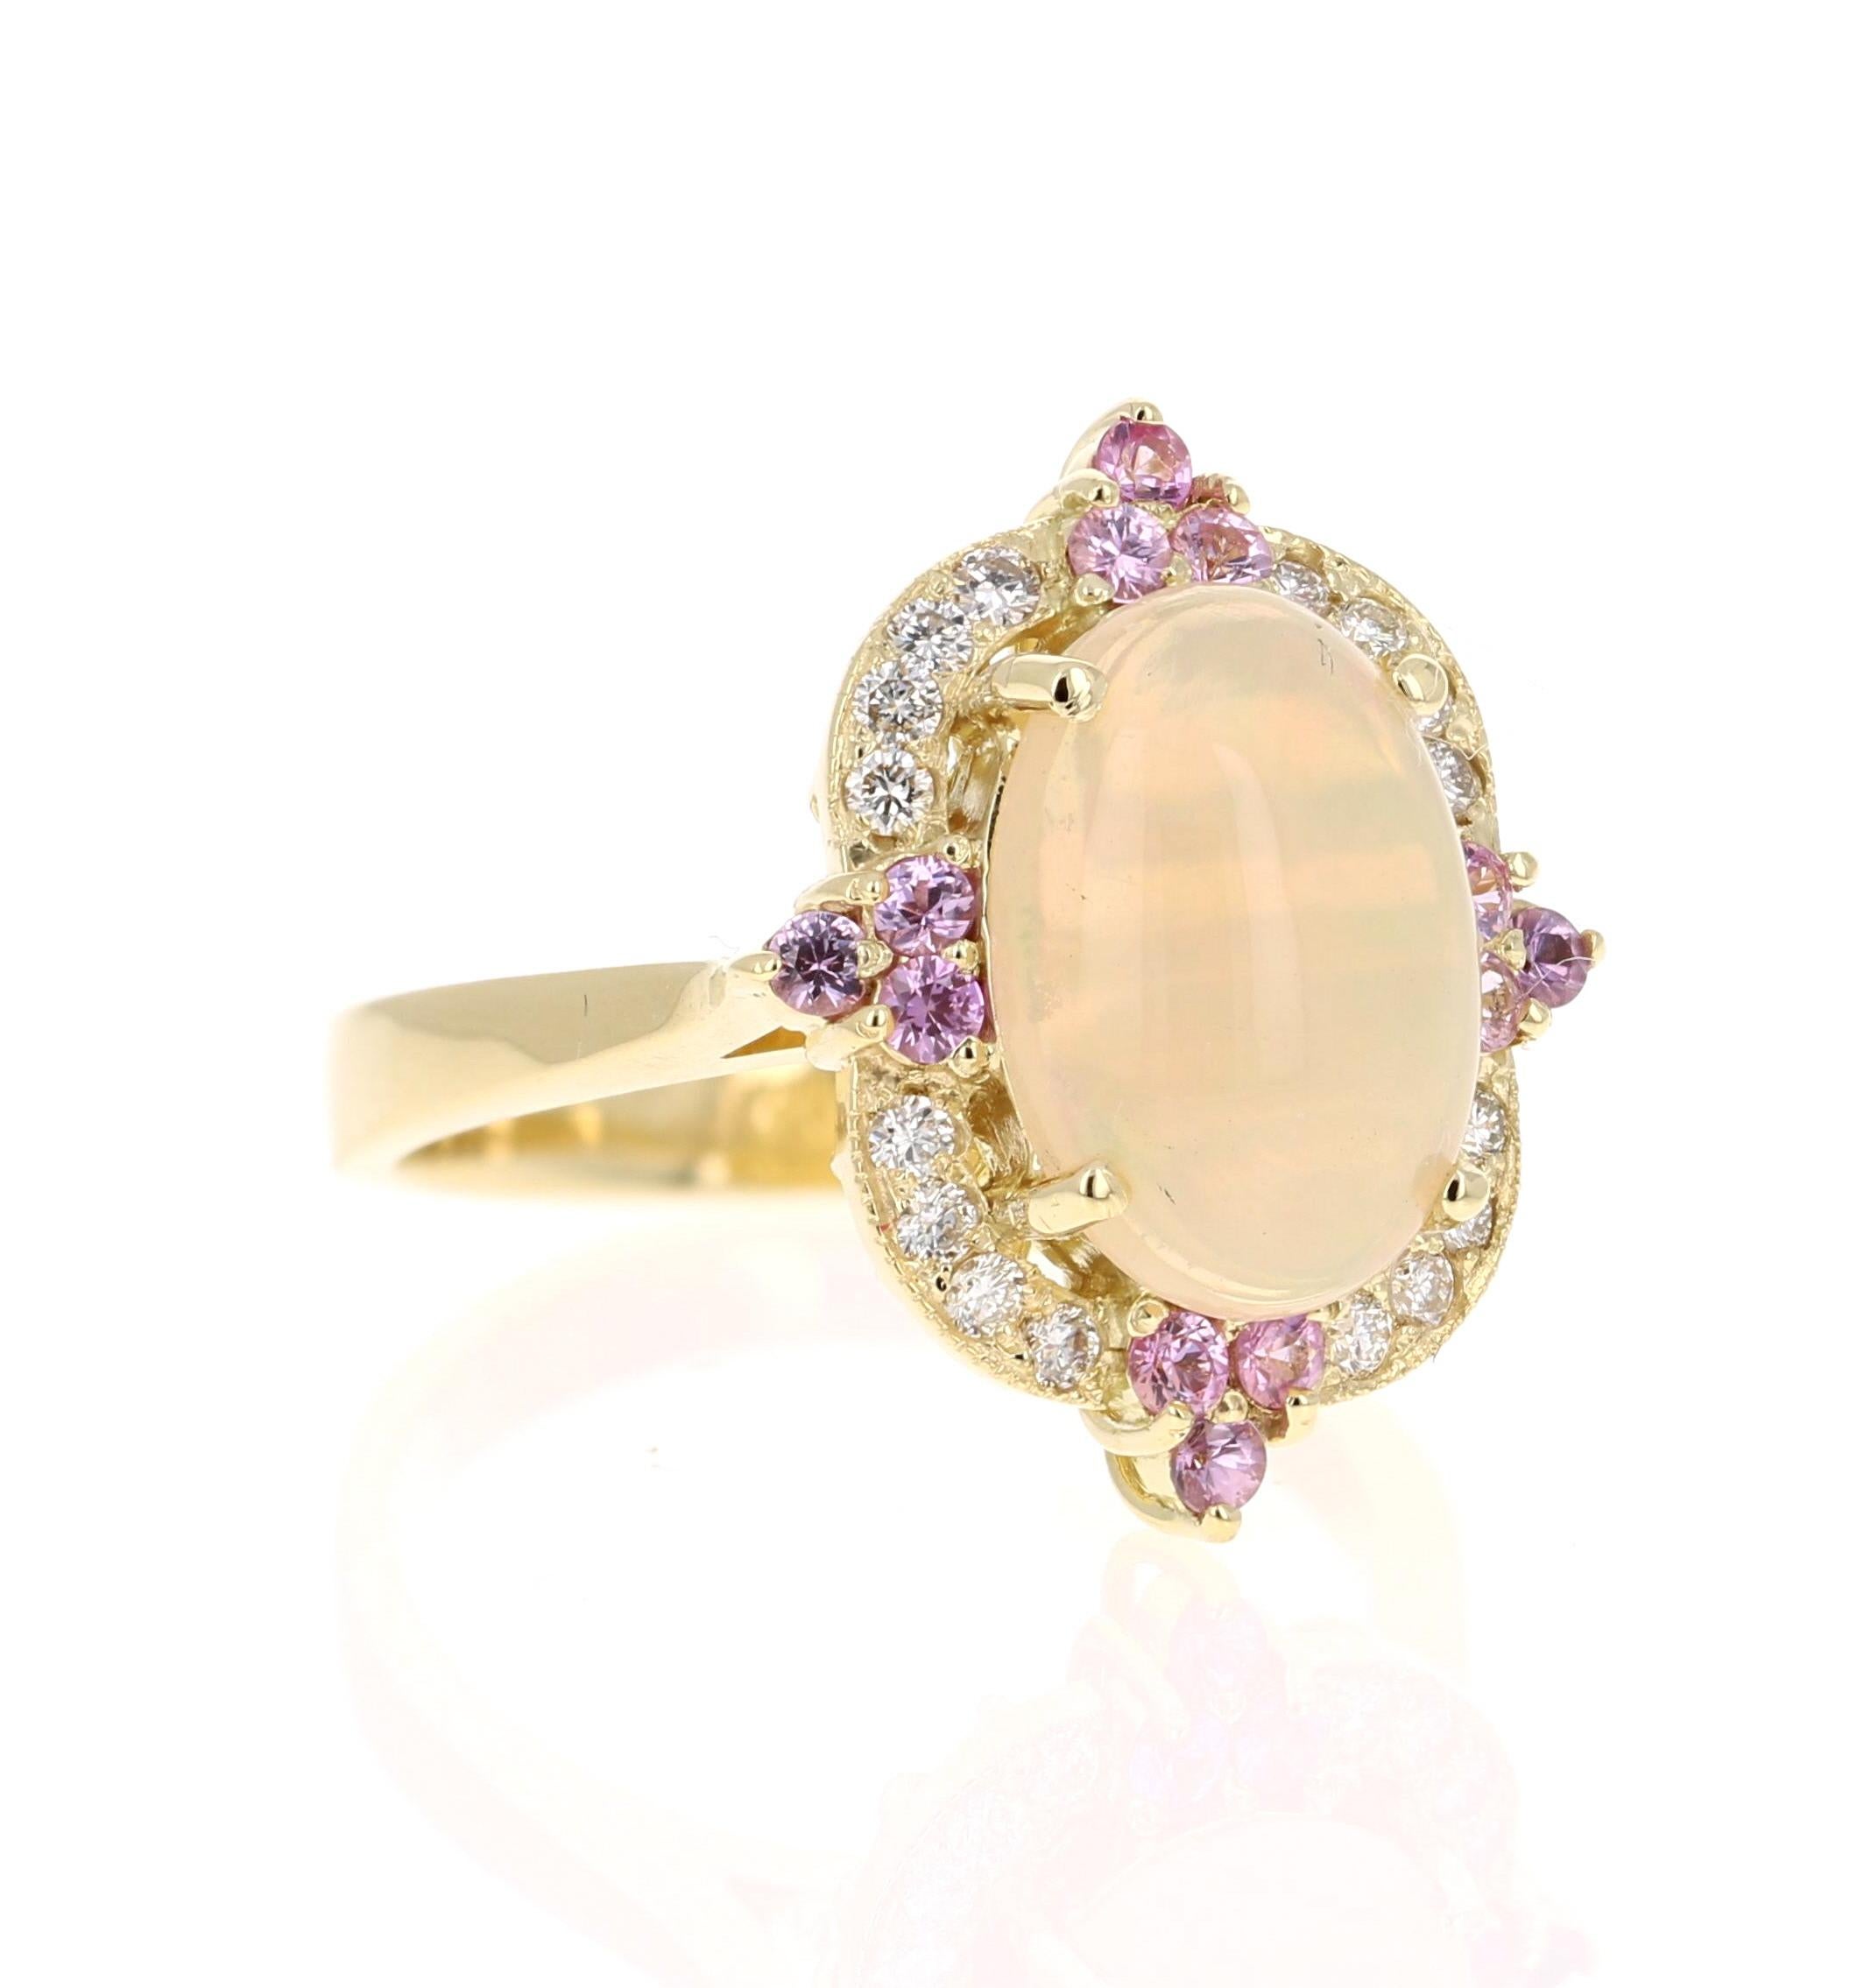 2.91 Carat Oval Cut Opal Diamond 18 Karat Yellow Gold Ring

The Oval Cut Opal in this ring weighs 2.30 Carats and the measurements of the Opal are 8 mm x 12 mm. The Opal is surrounded by 4 Pink Sapphires that weigh 0.37 carats and also 16 Round Cut